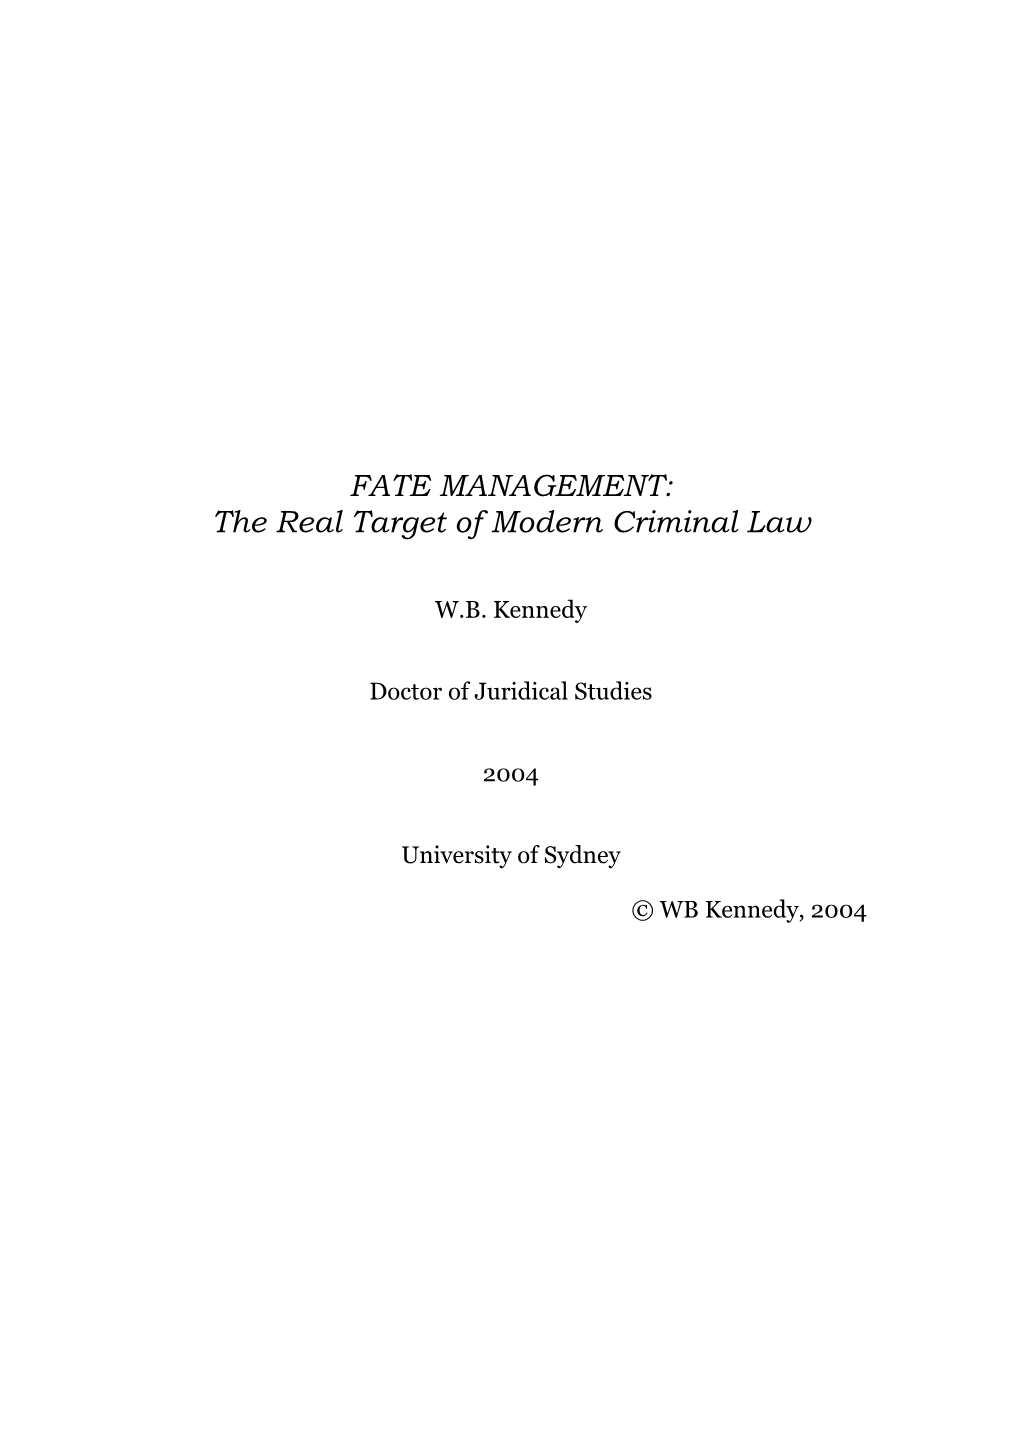 FATE MANAGEMENT: the Real Target of Modern Criminal Law